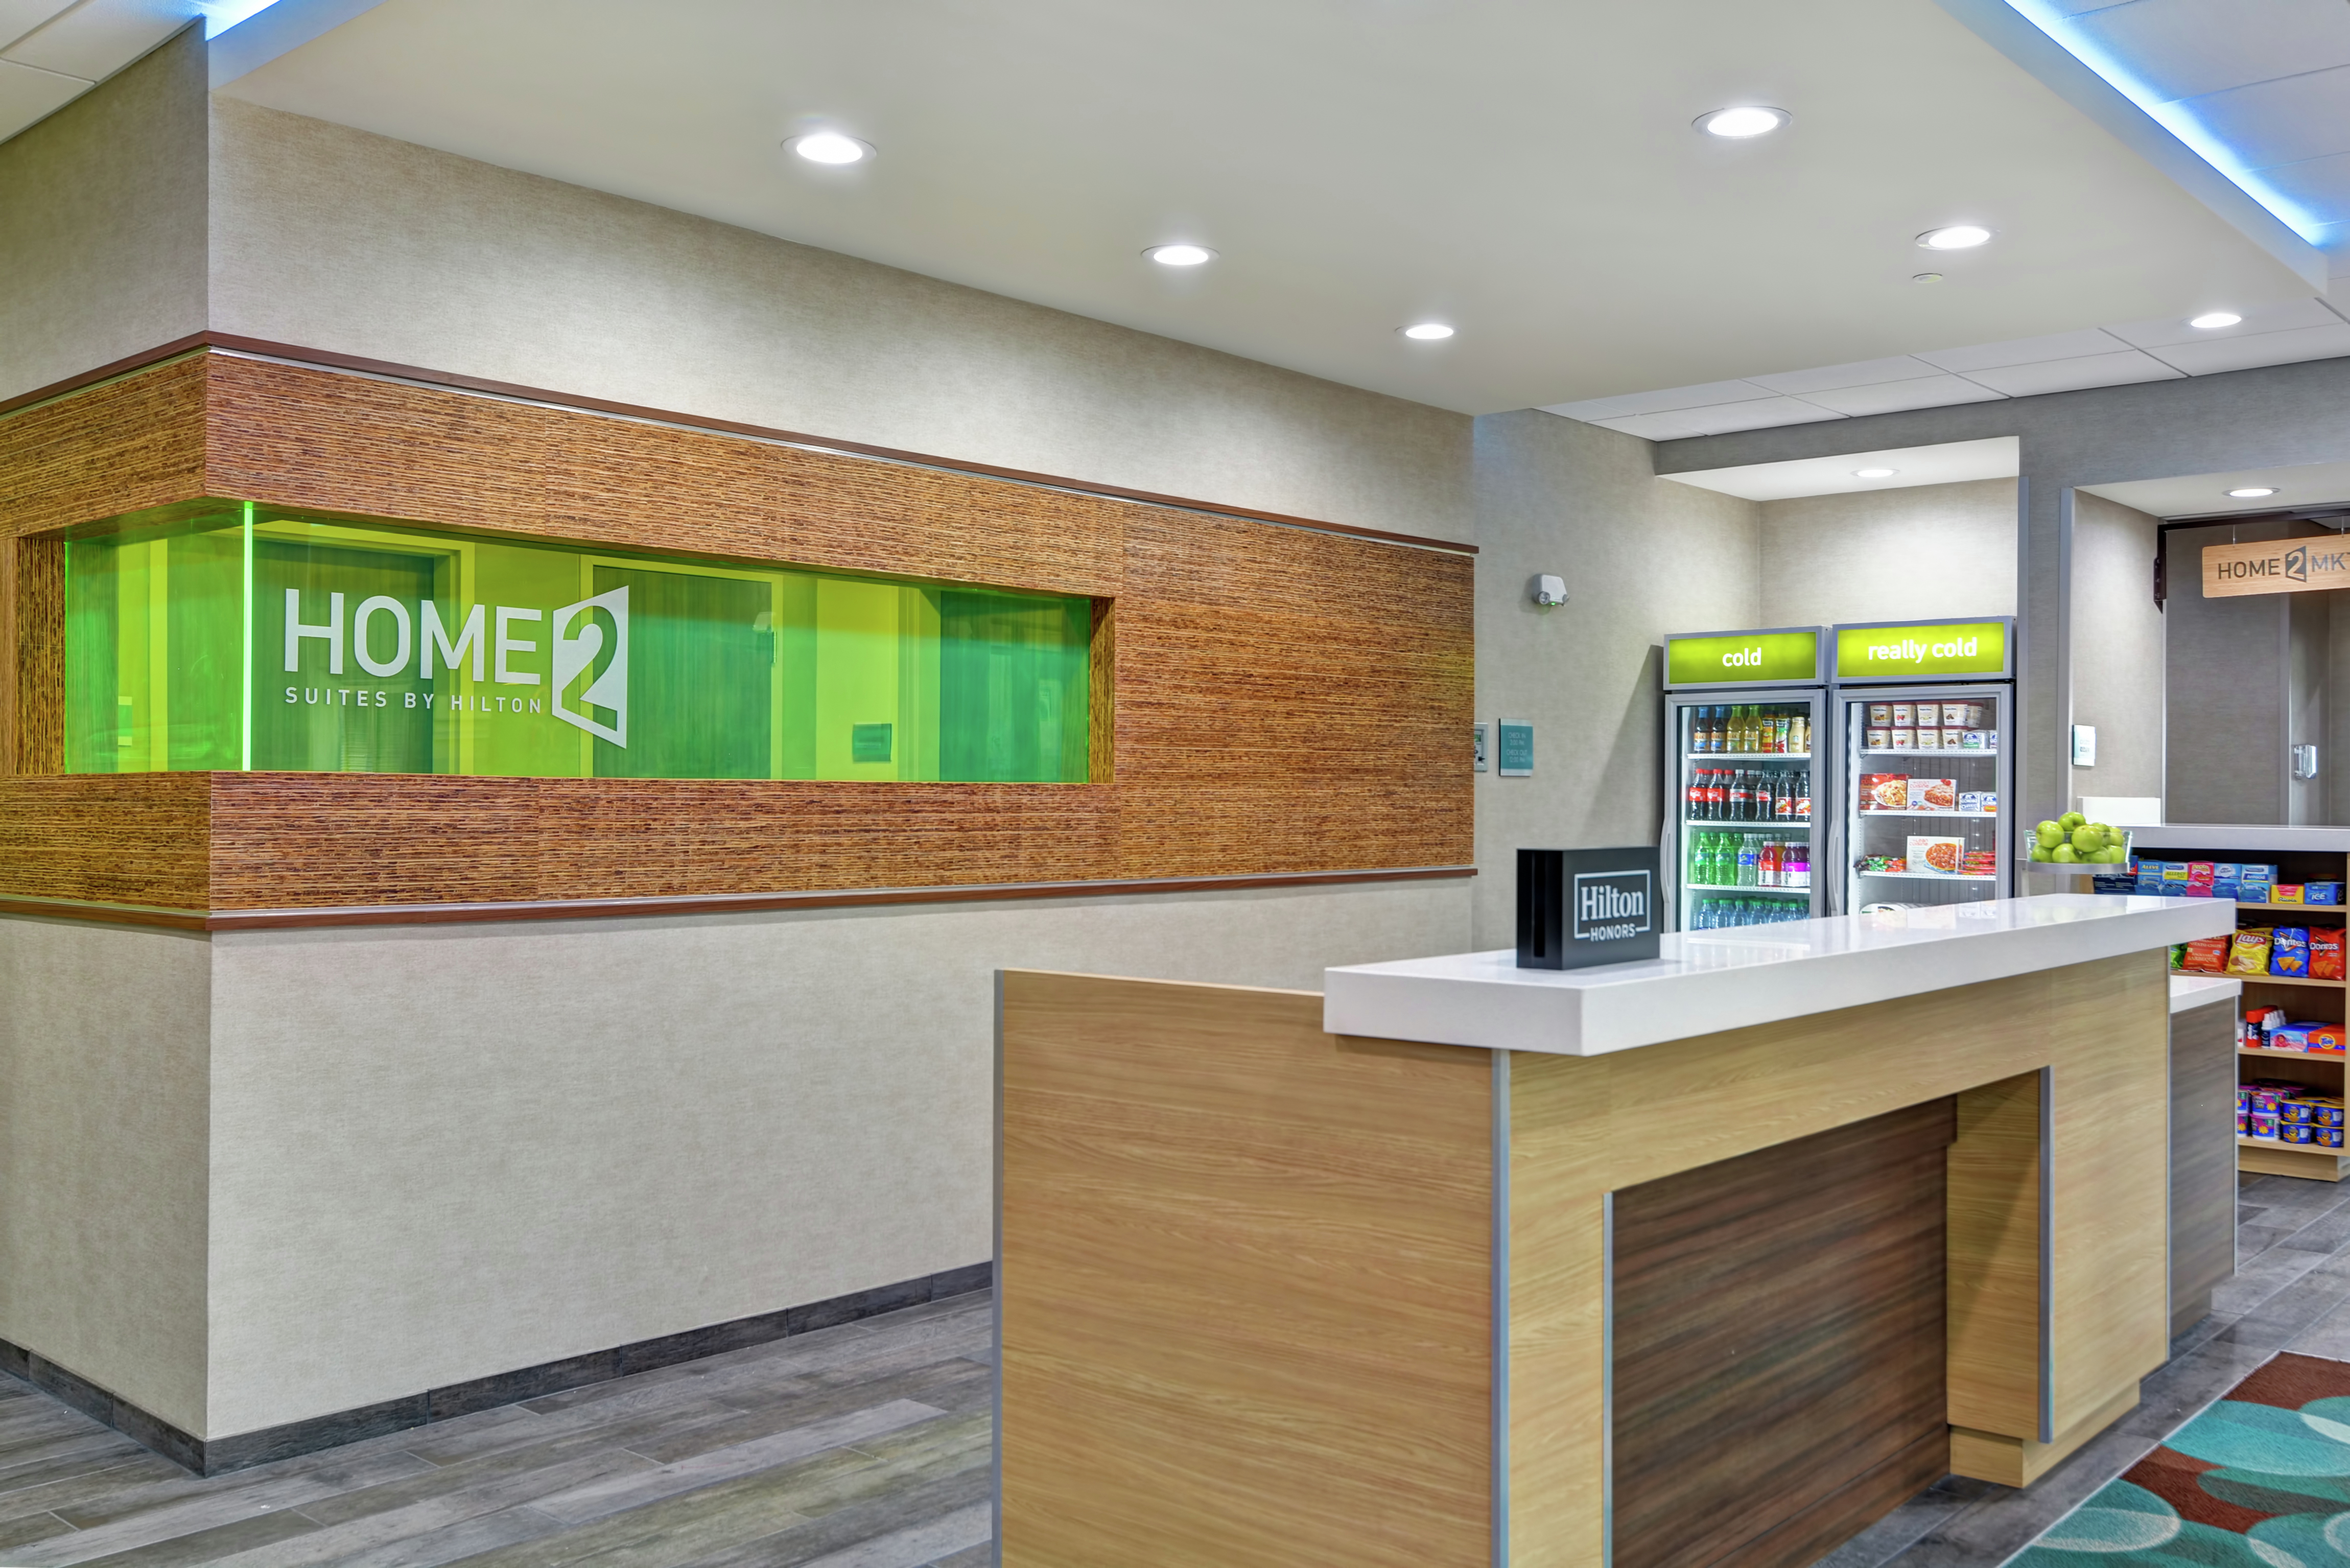 Hotel Front Desk With Snack Shop